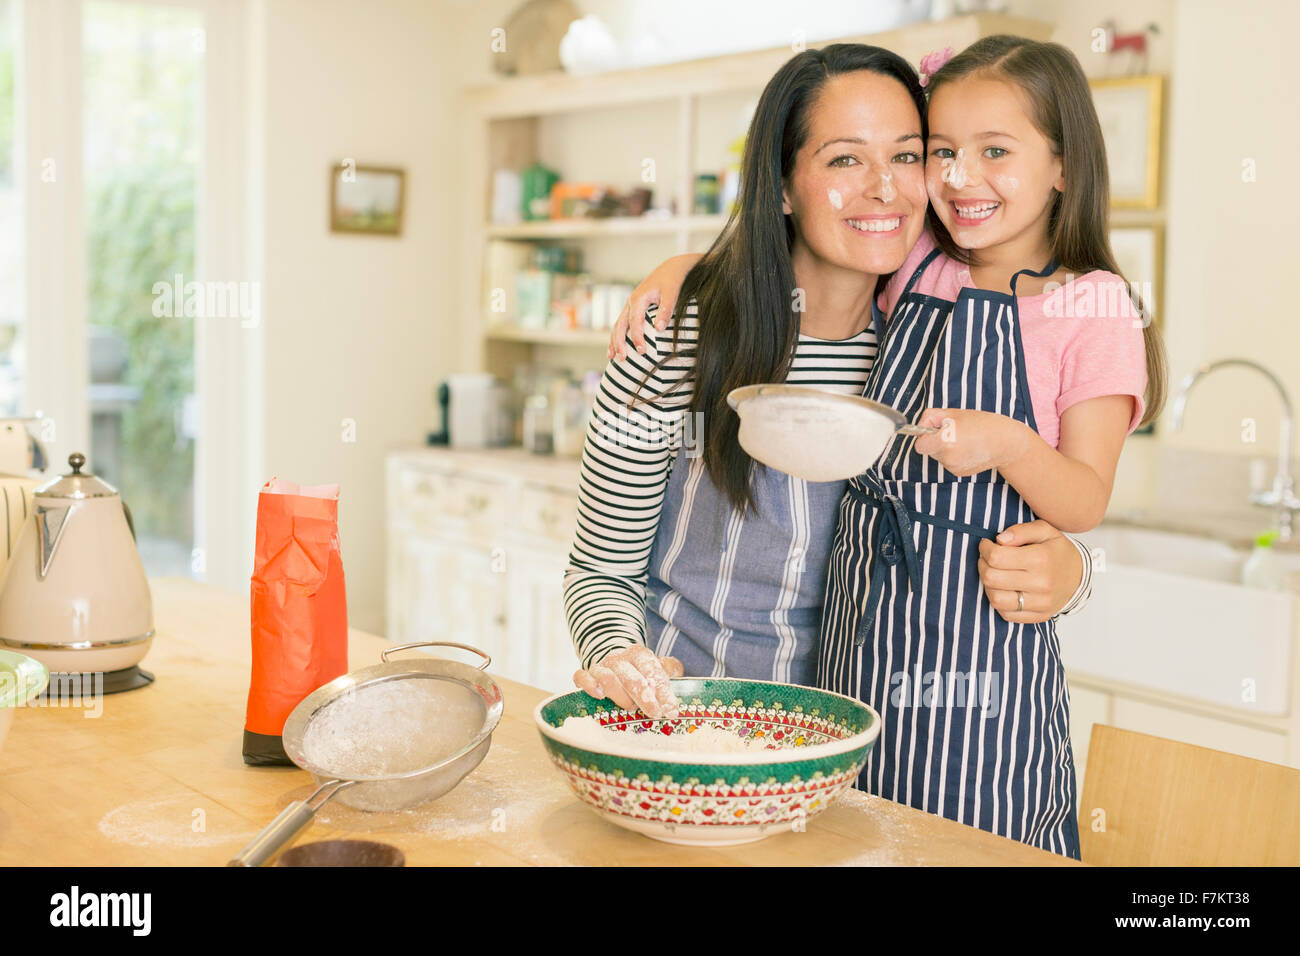 Portrait playful mother and daughter baking in kitchen with flour on faces Stock Photo